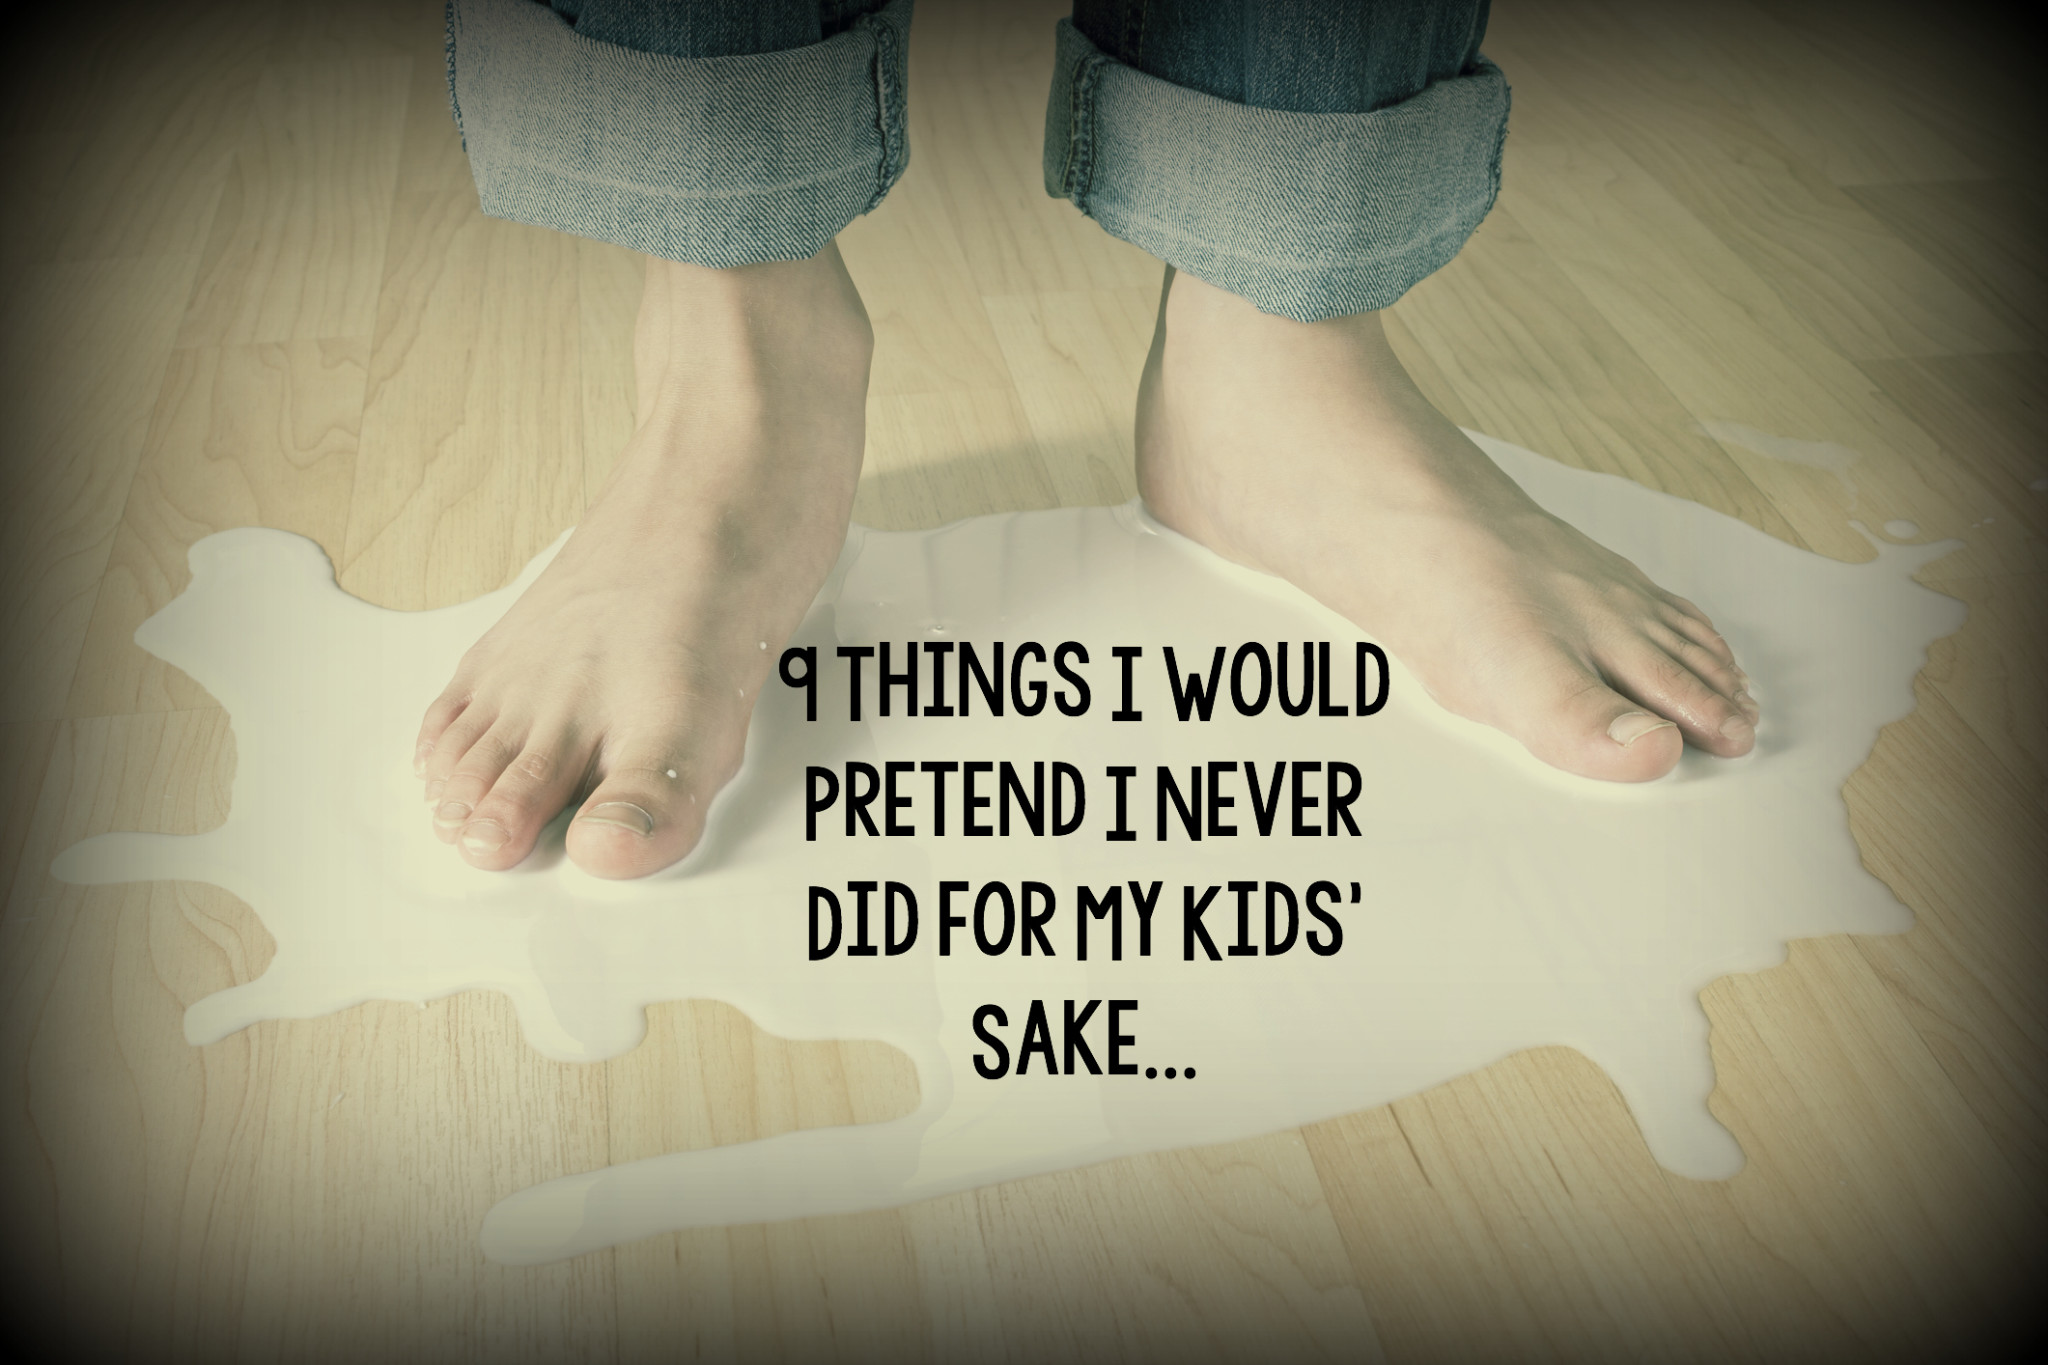 9 Things I Would Pretend I Never Did for My Kids' Sake